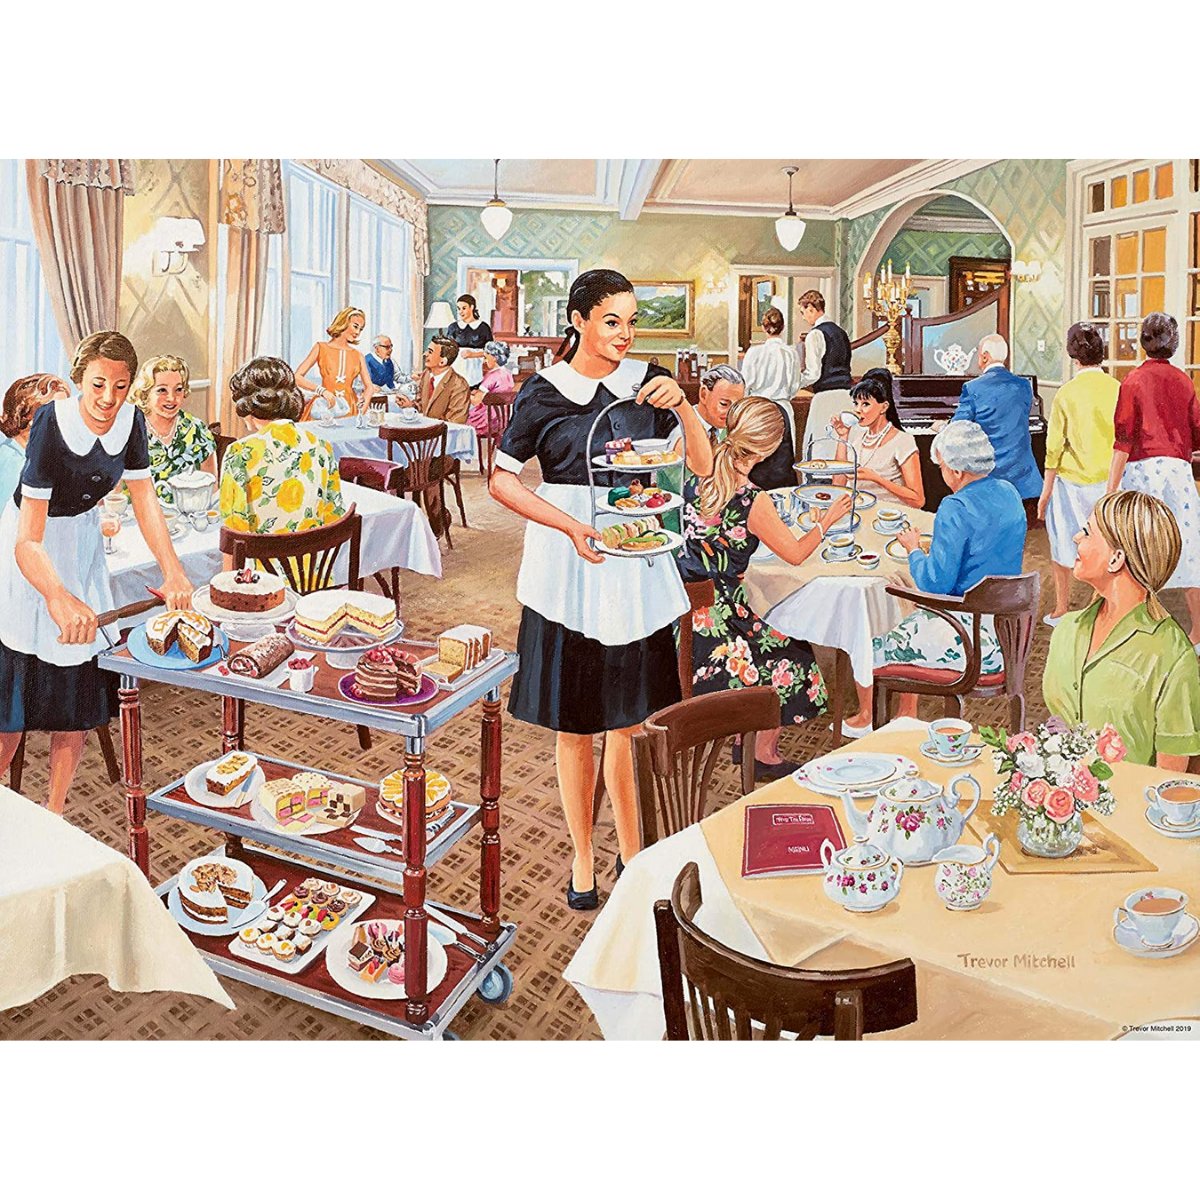 Ravensburger Happy Days at Work, The Waitress 500 Piece Jigsaw Puzzle - Phillips Hobbies